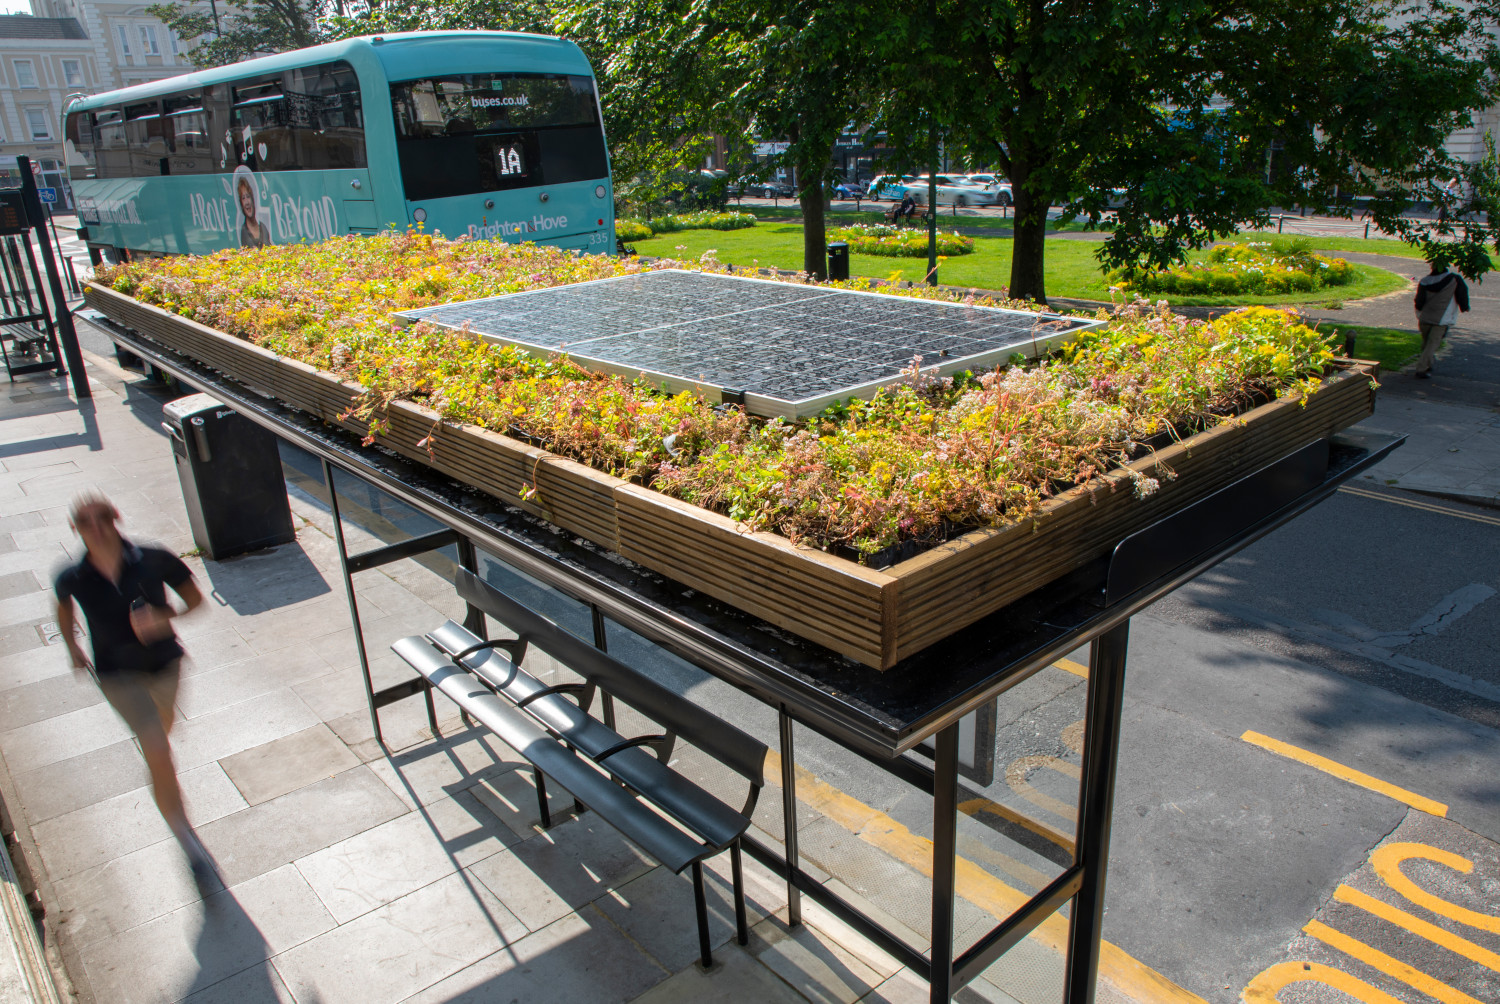 Aerial picture of Sedum M-Tray on Clear Channel Bus Shelter - BRIGHTON